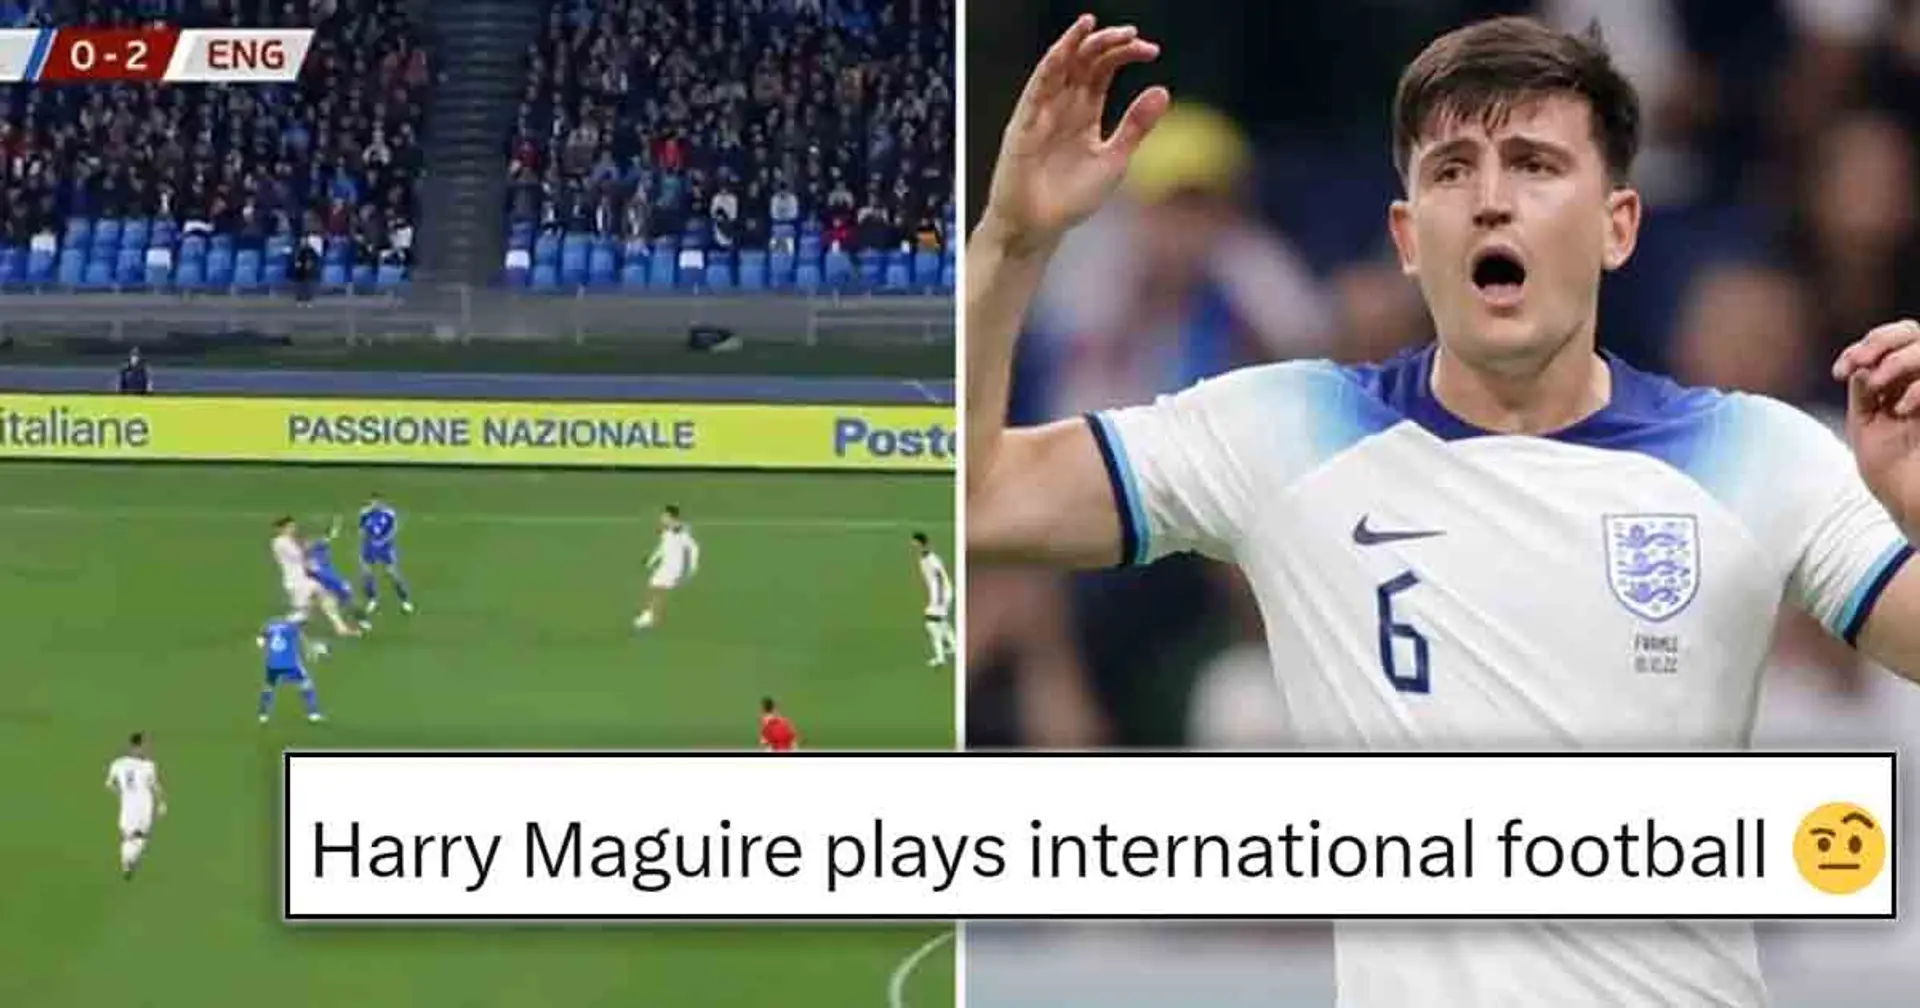 'Exactly why it should be his last season at United': Fans criticize Maguire for poor moment in Italy clash